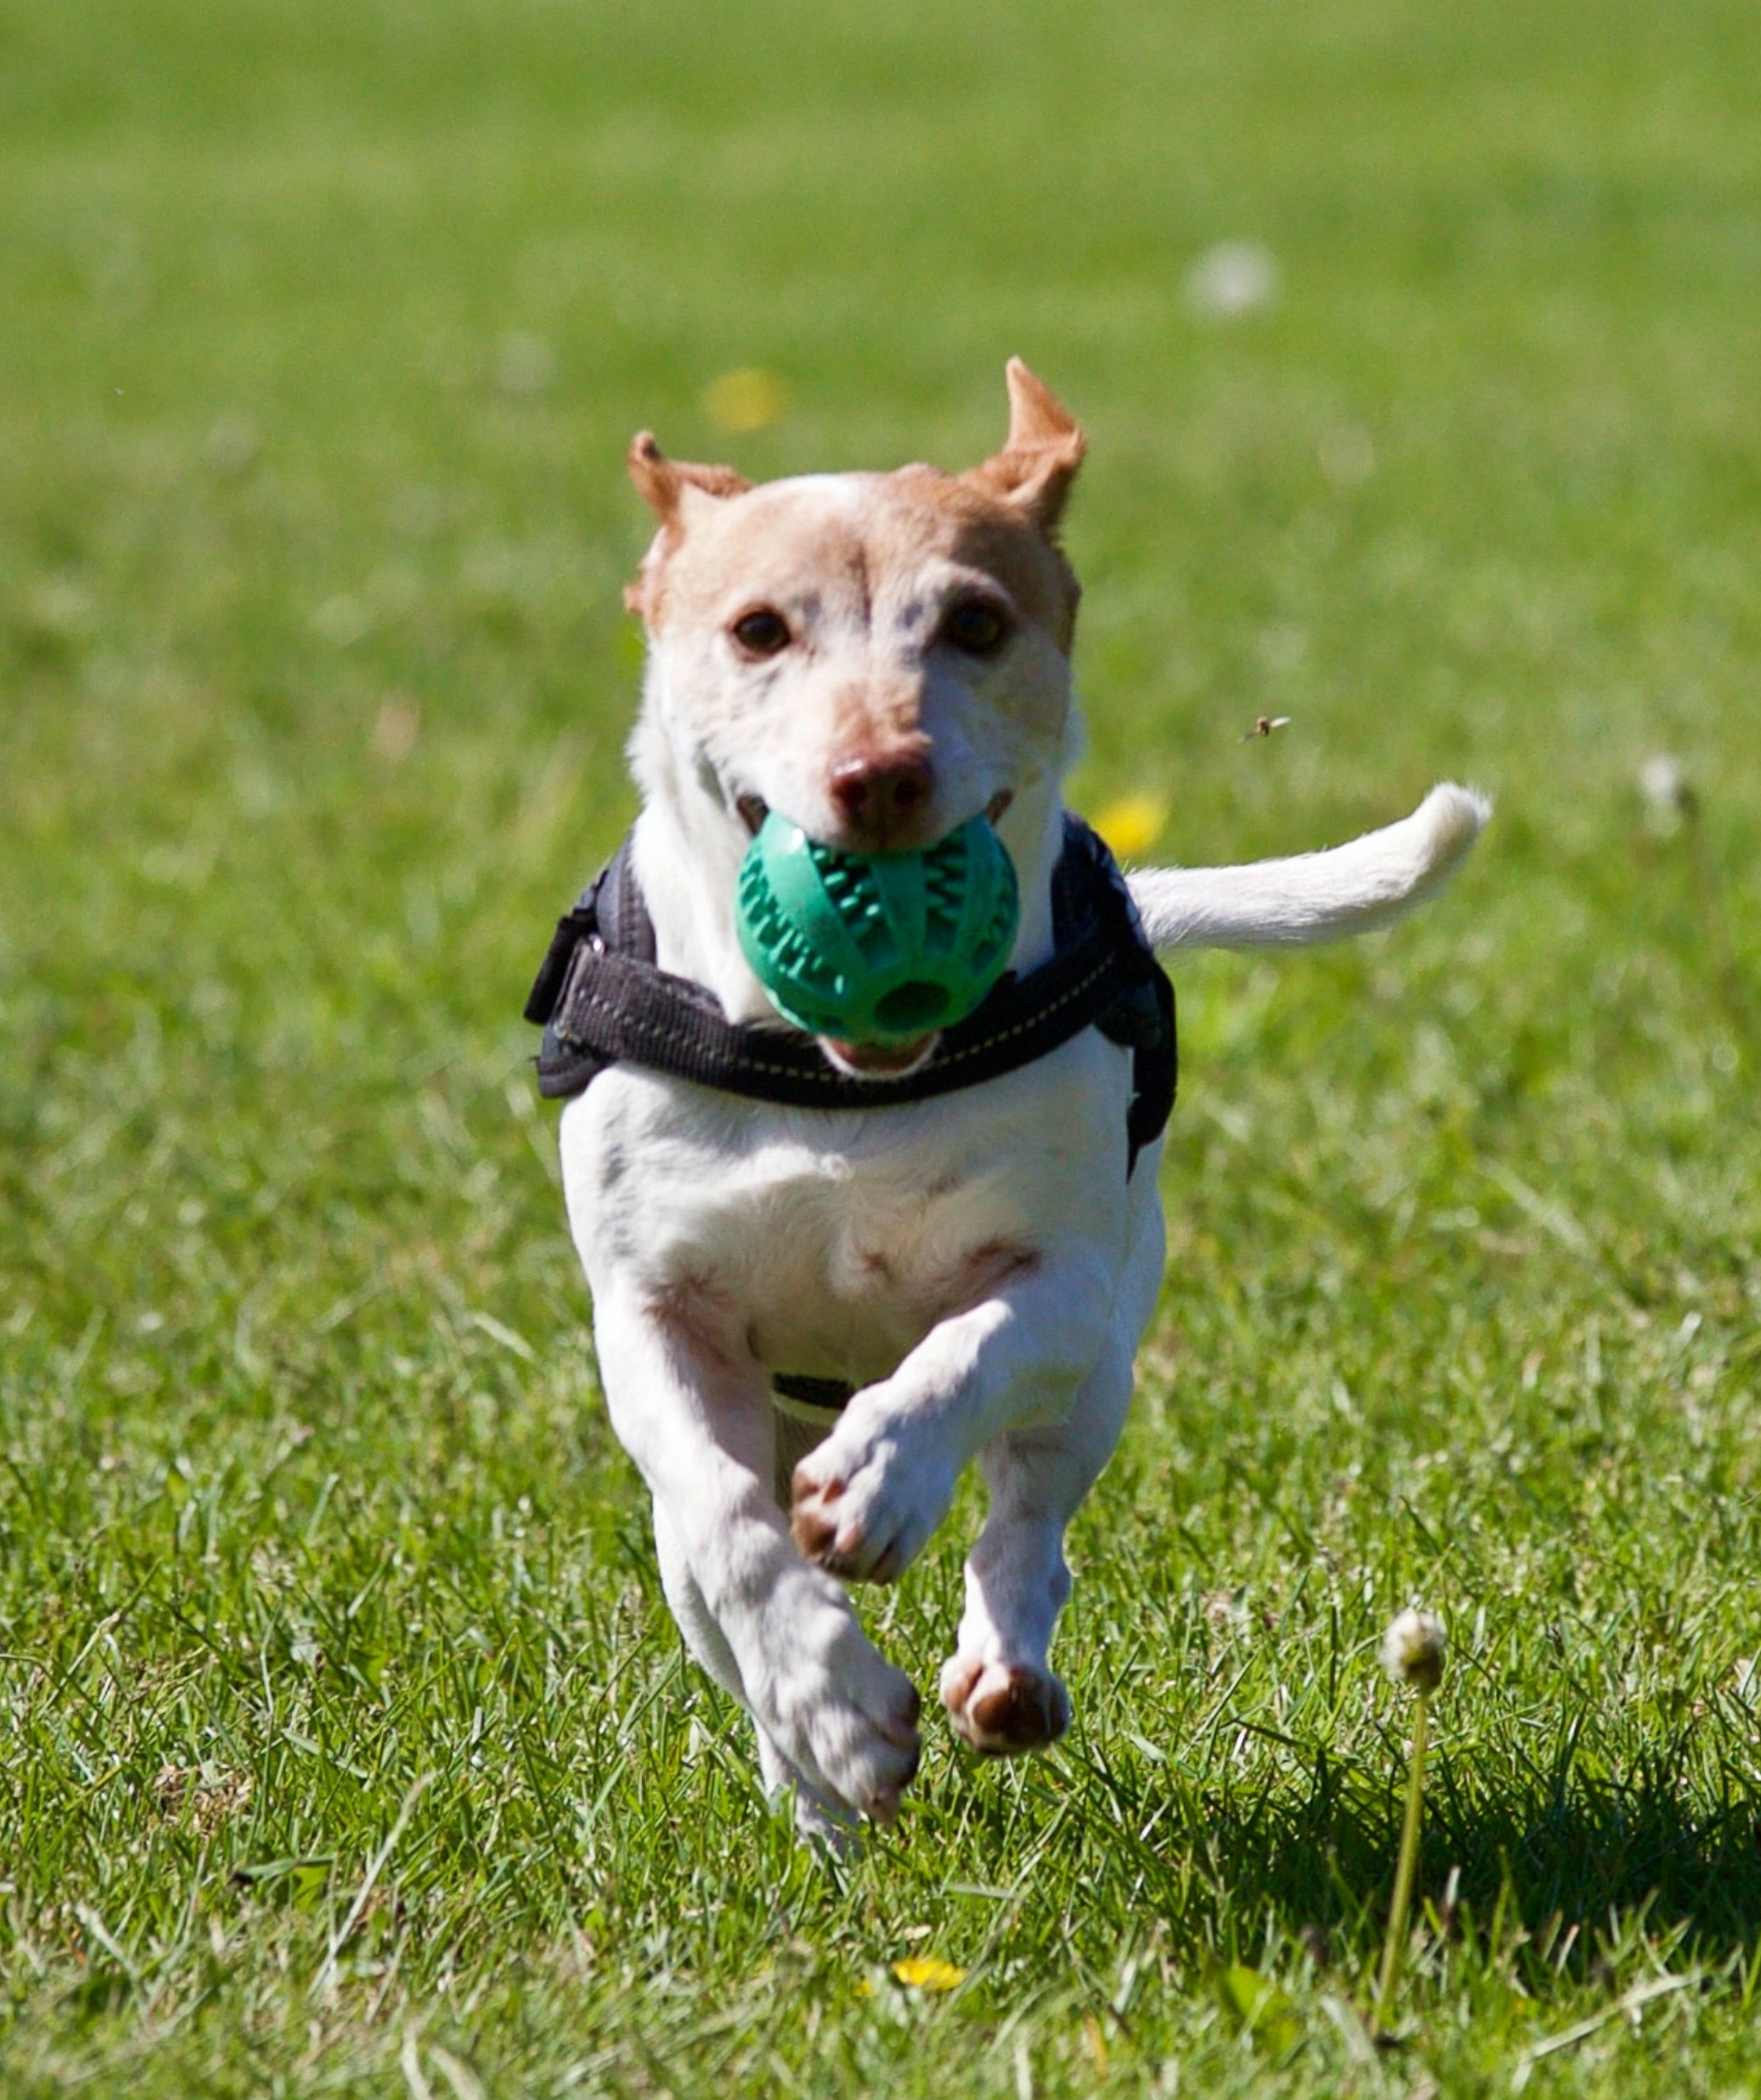 Good dog running with a smile holding a green ball